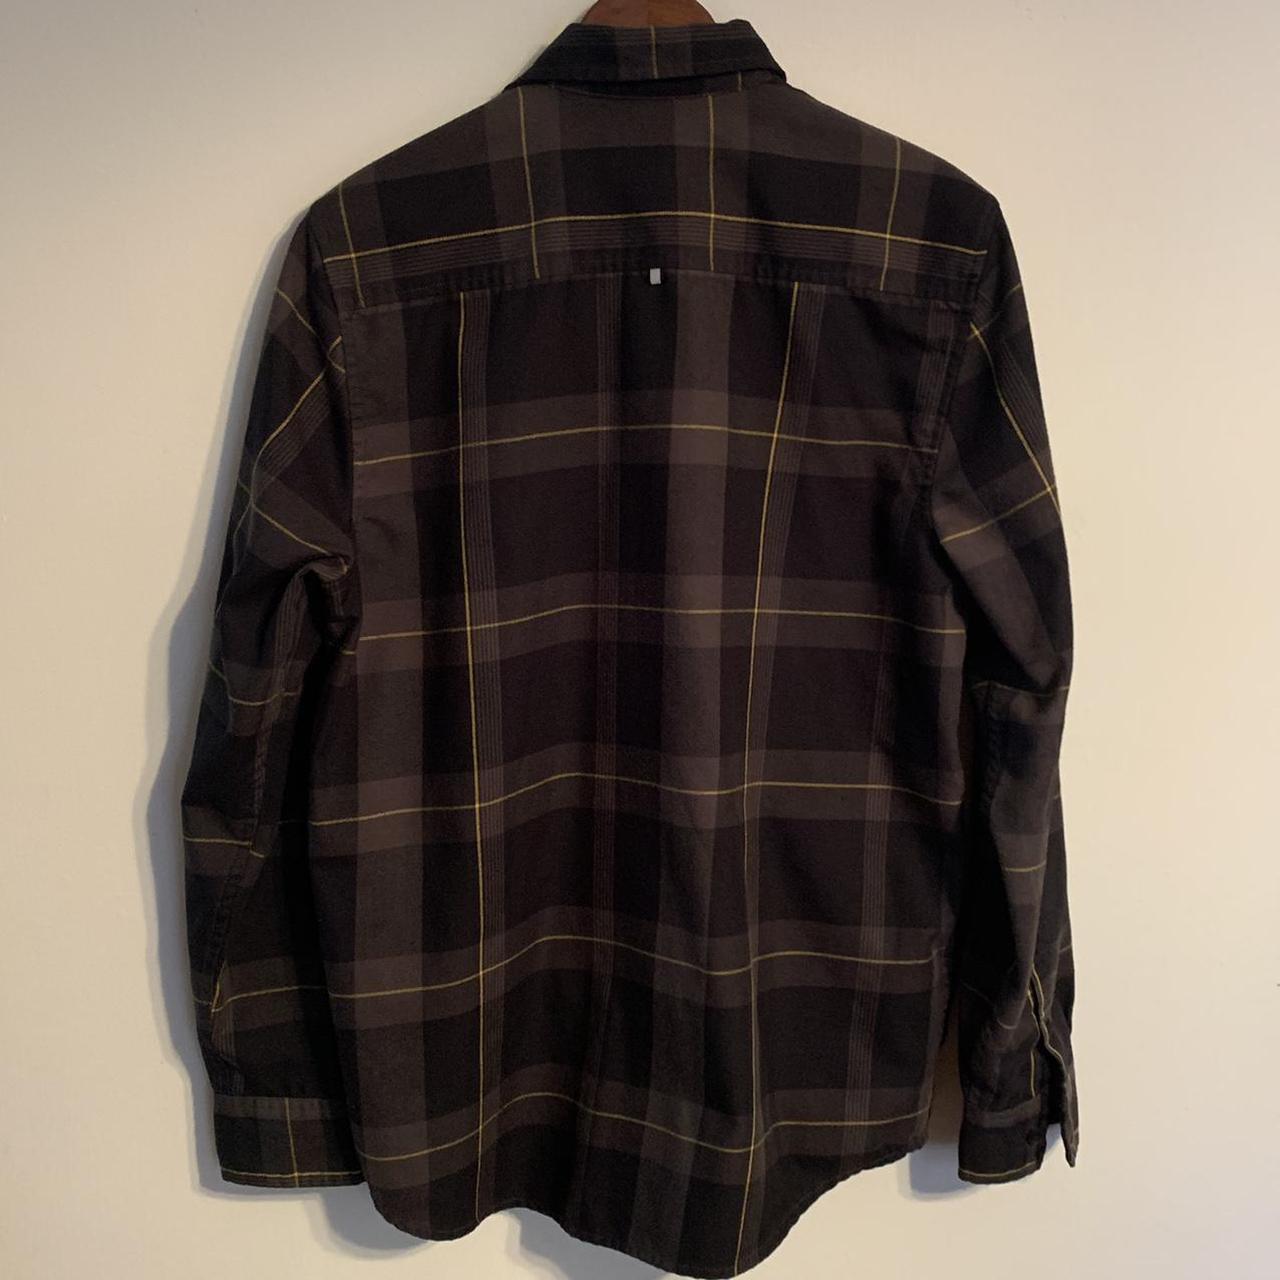 Product Image 2 - OAKLEY button-down flannel shirt/ overshirt.